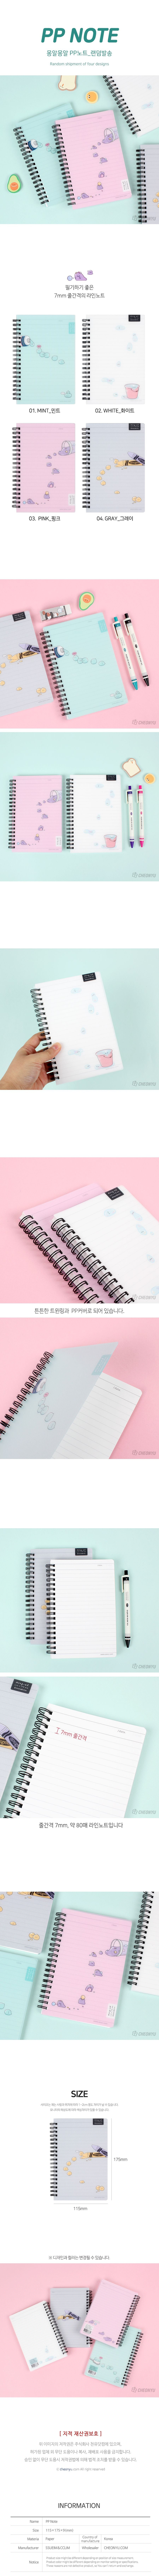 Ssueim & Cclim MongAlMongAl PP Notebook (Lined)